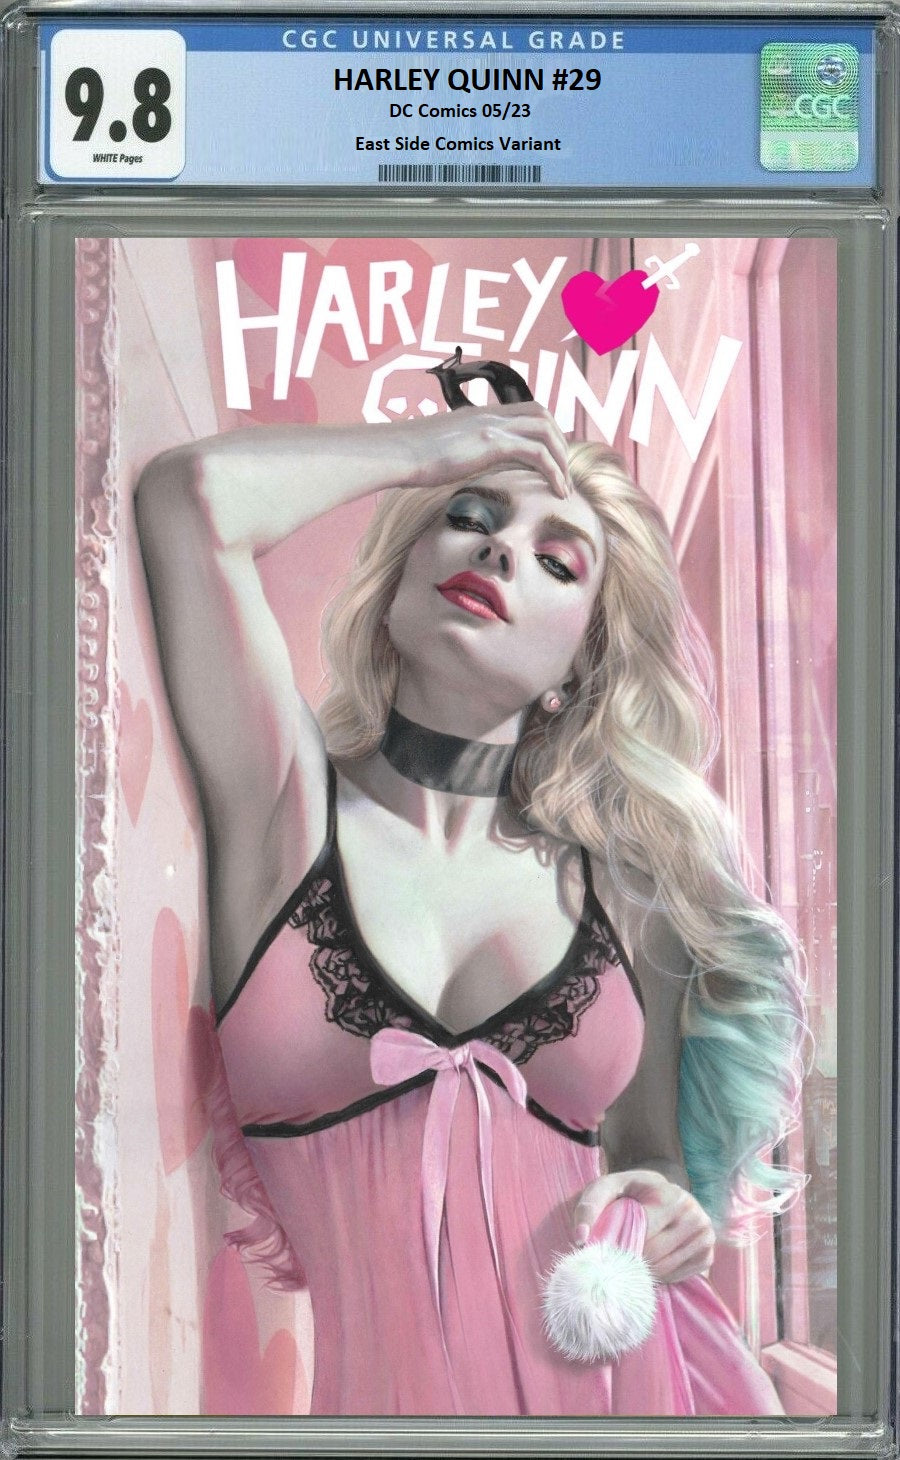 HARLEY QUINN #29 NATALI SANDERS TRADE DRESS VARIANT LIMITED TO 3000 COPIES CGC 9.8 PREORDER